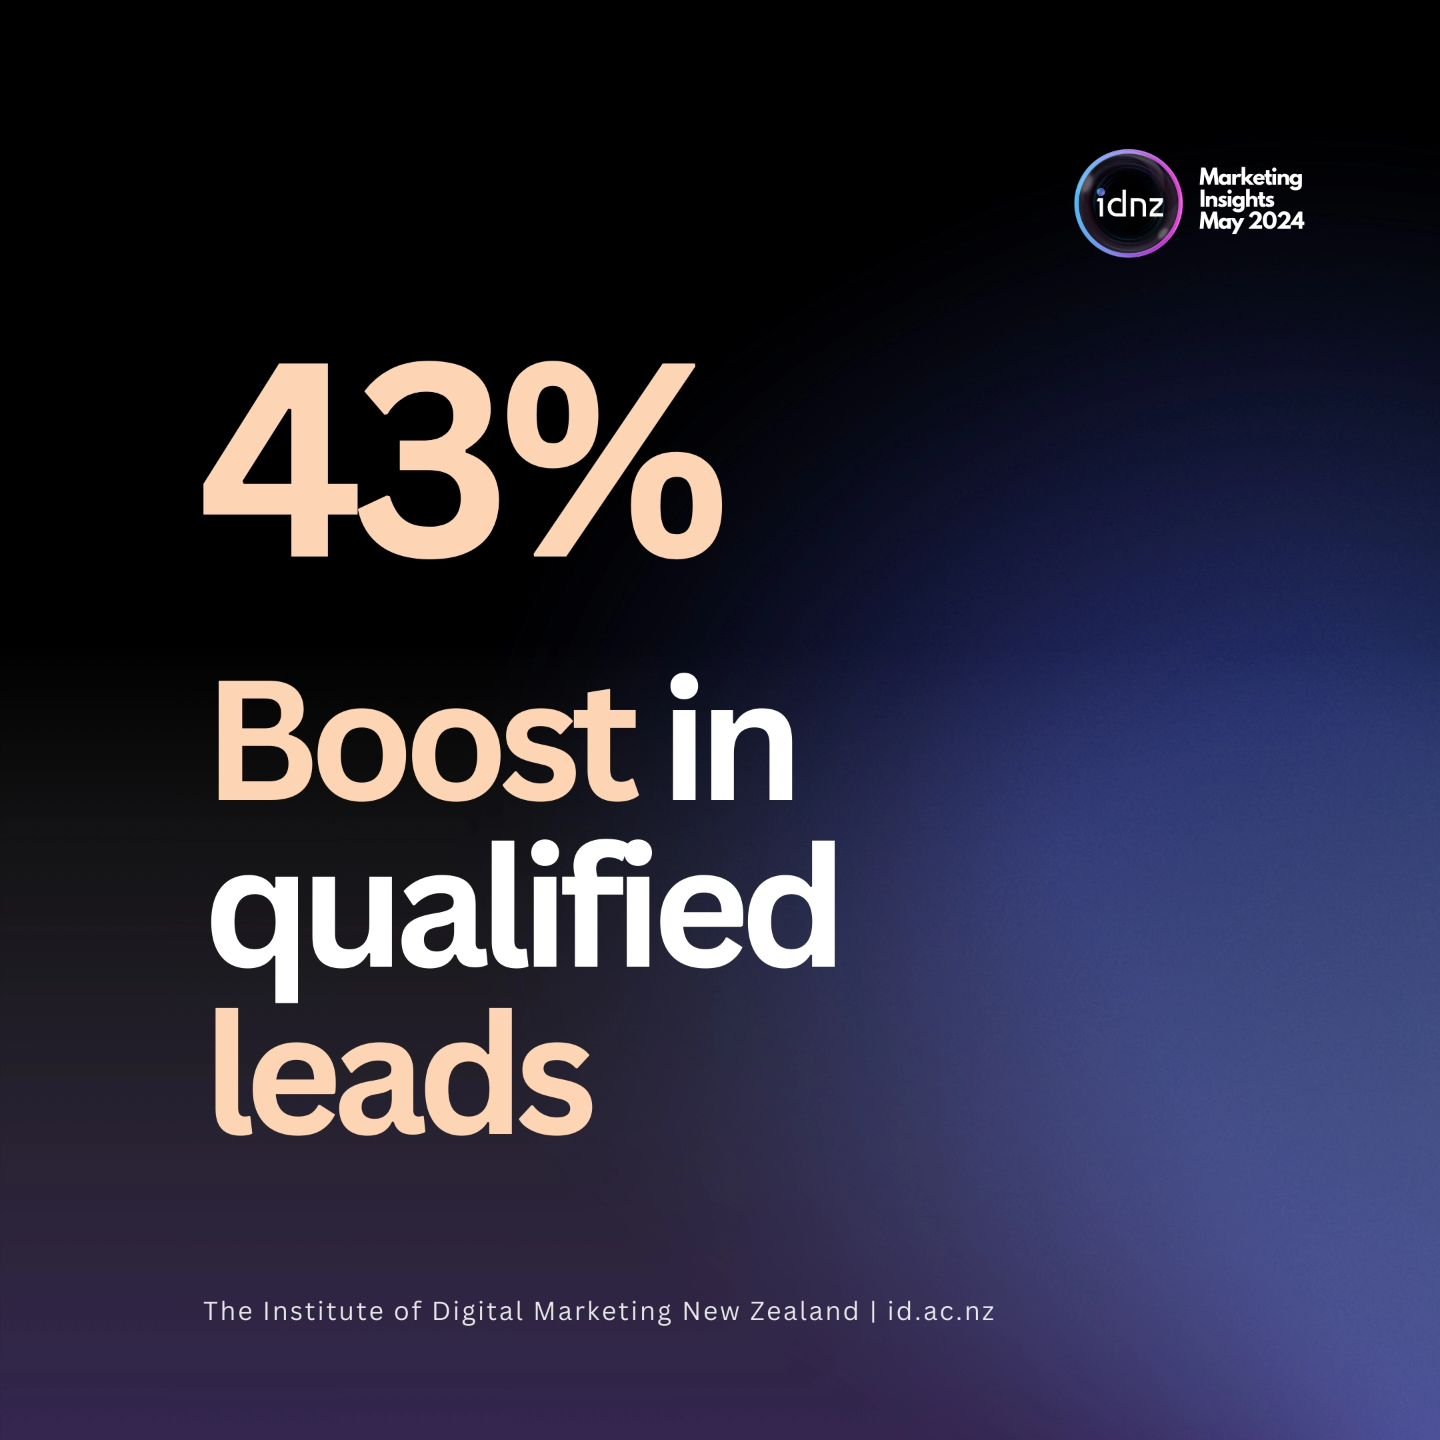 Studies show that consistent content marketing can lead to a whopping 43% increase in qualified leads  ref: HubSpot

By offering a mix of content, you keep your audience interested and coming back for more. This consistent value builds trust and esta